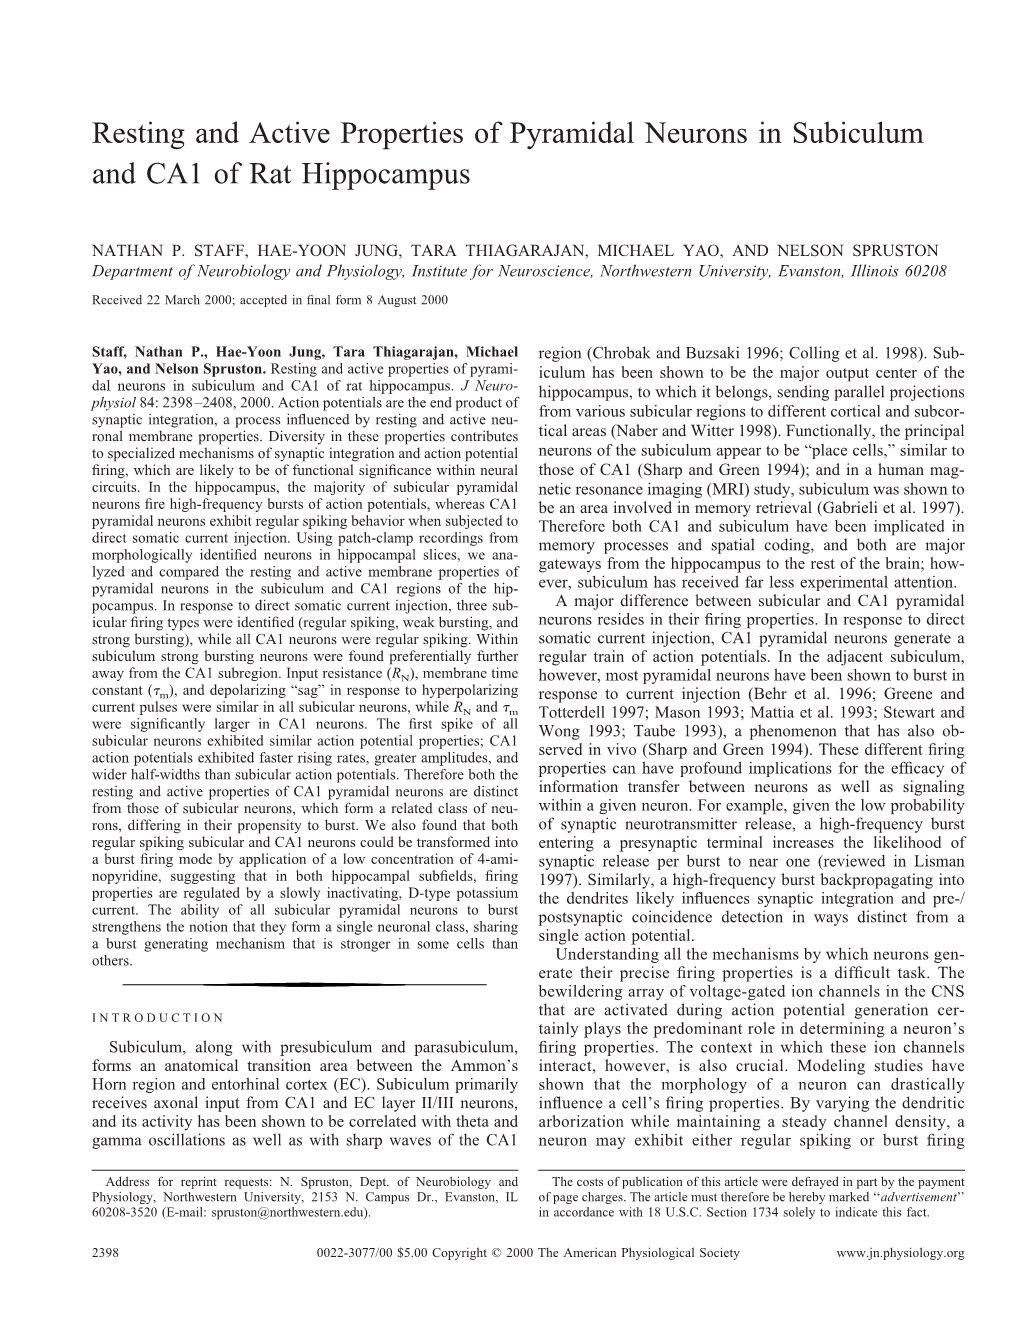 Resting and Active Properties of Pyramidal Neurons in Subiculum and CA1 of Rat Hippocampus